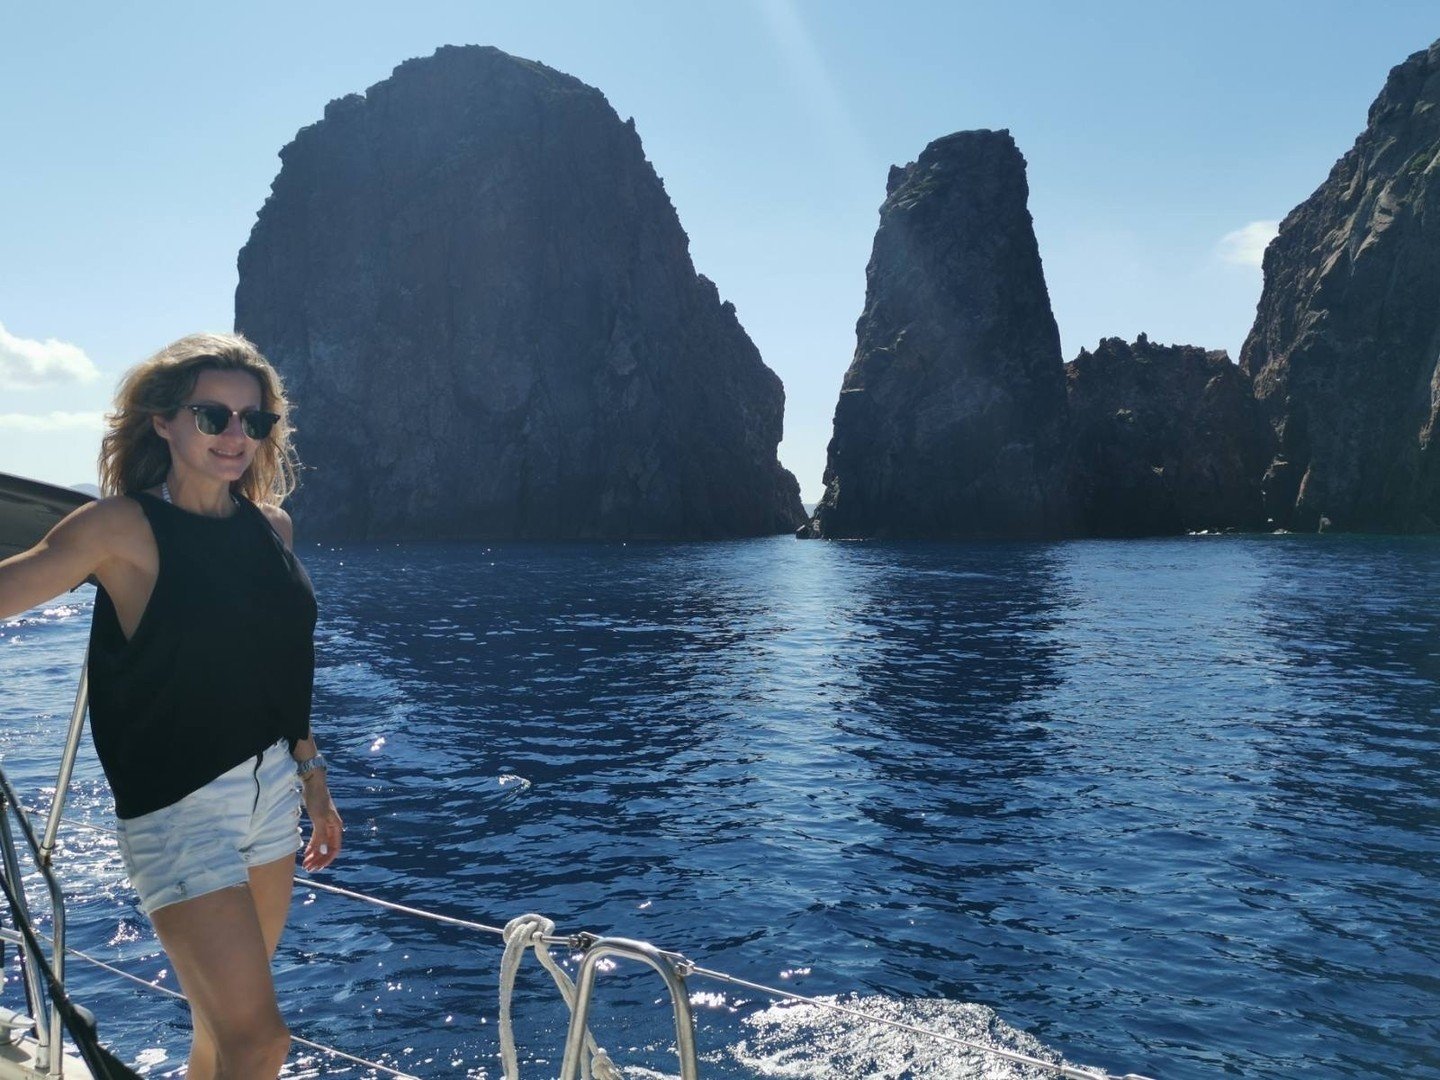 🧿Throwback Thursday takes us to a favorite moment with our founder, @katerina.fragkou.adai, as she navigates the tranquil Mediterranean waters. Here, she's in search of the perfect new spot, amidst majestic remote rock formations. This journey is ju